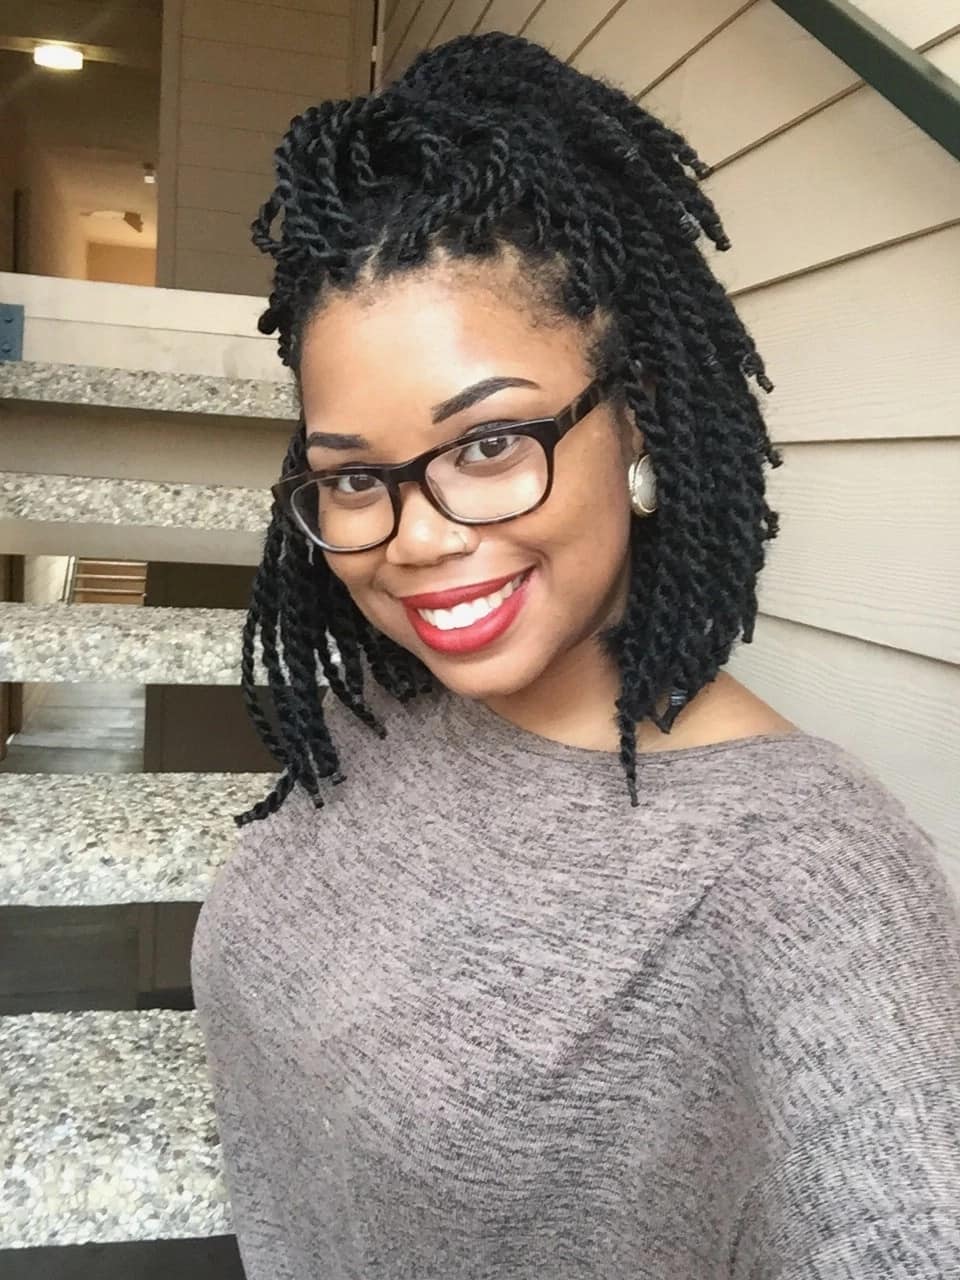 How to Cut Long Crochet Braids into a Short Style